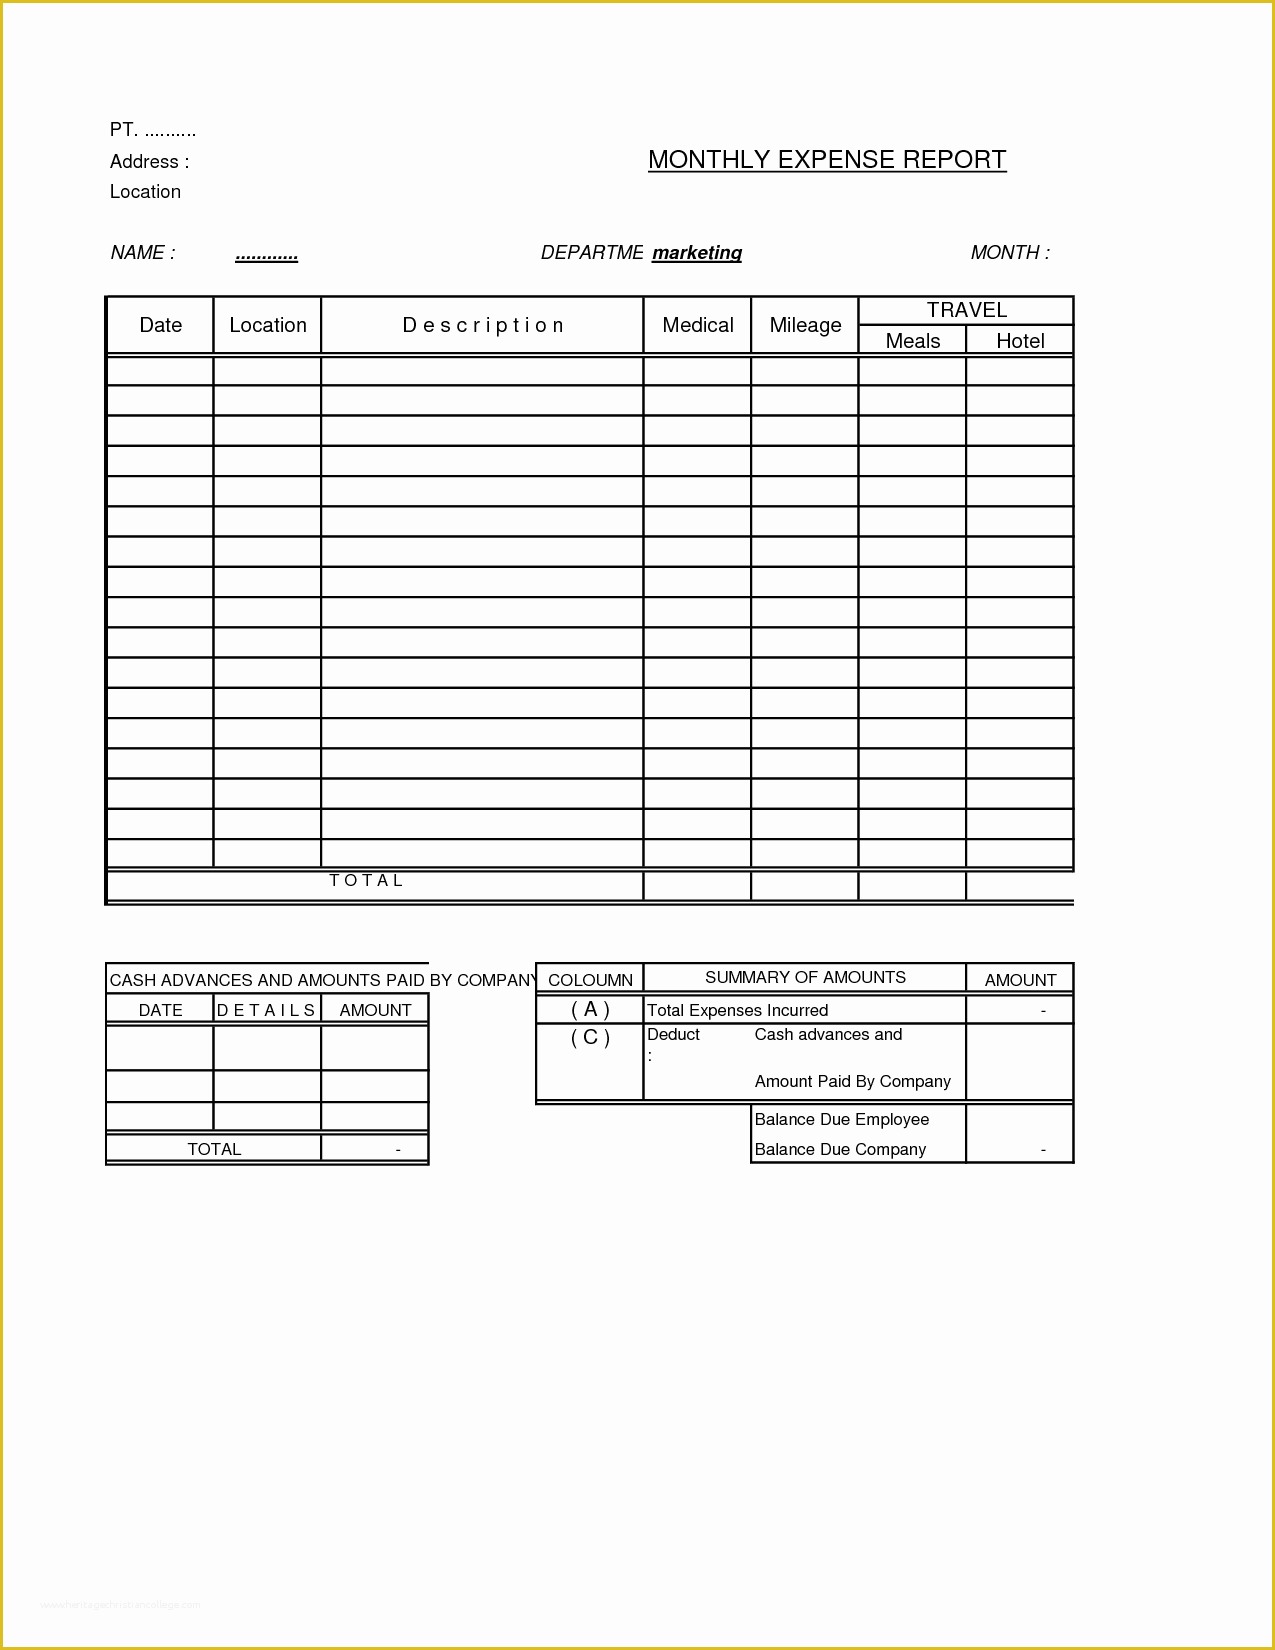 Business Expense Report Template Free Of Free Expense Report form Sample to Track Pany Expenses